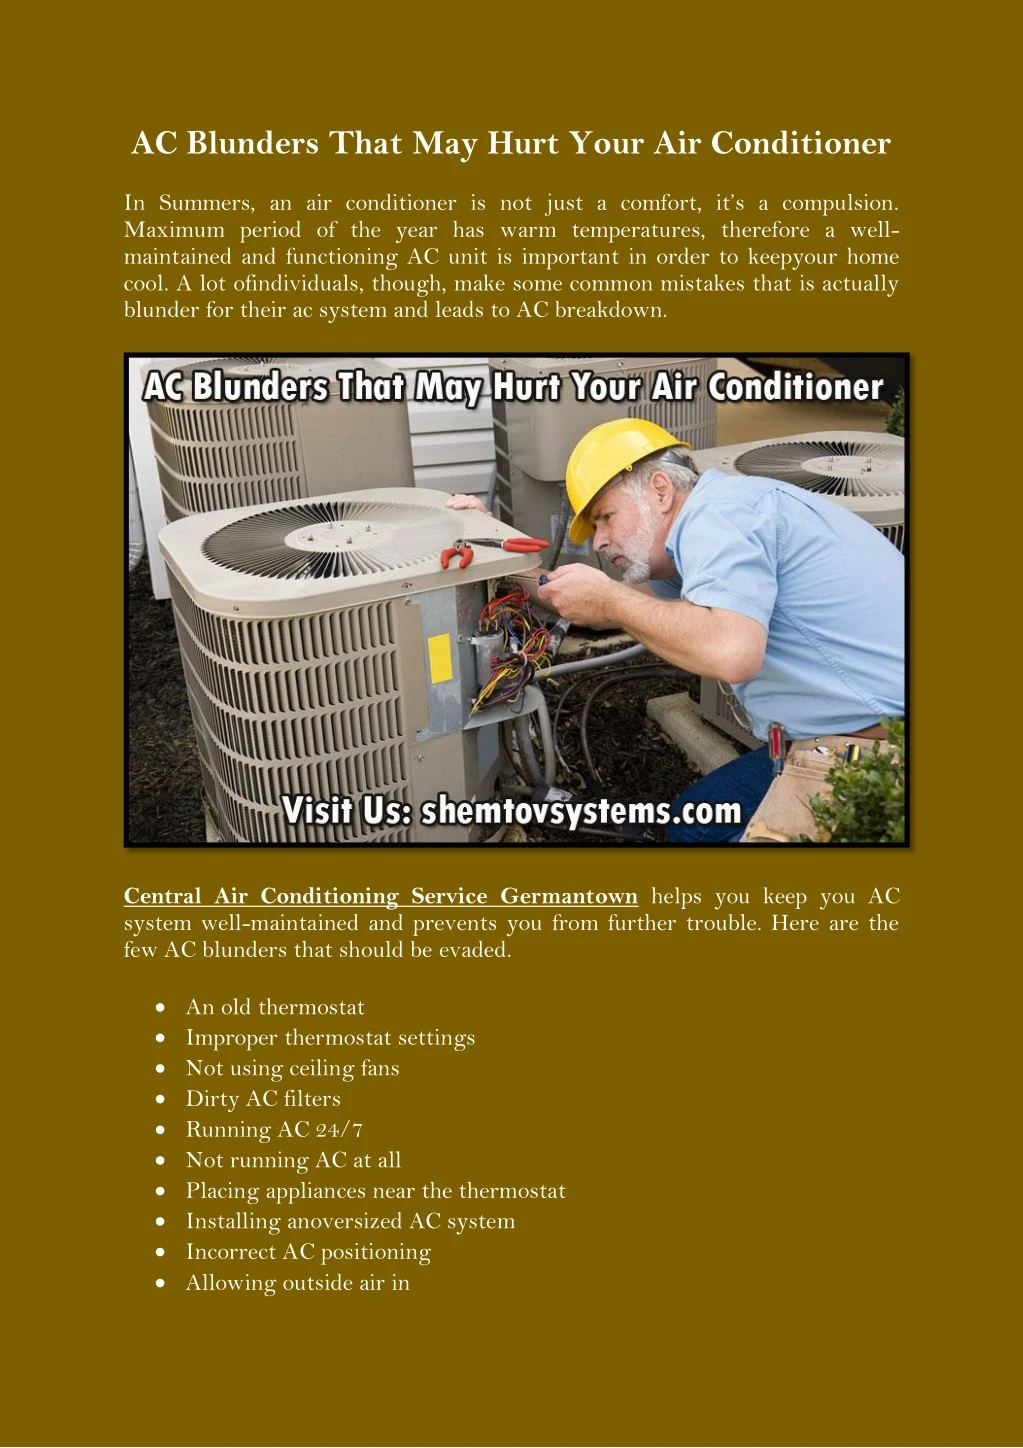 ac blunders that may hurt your air conditioner